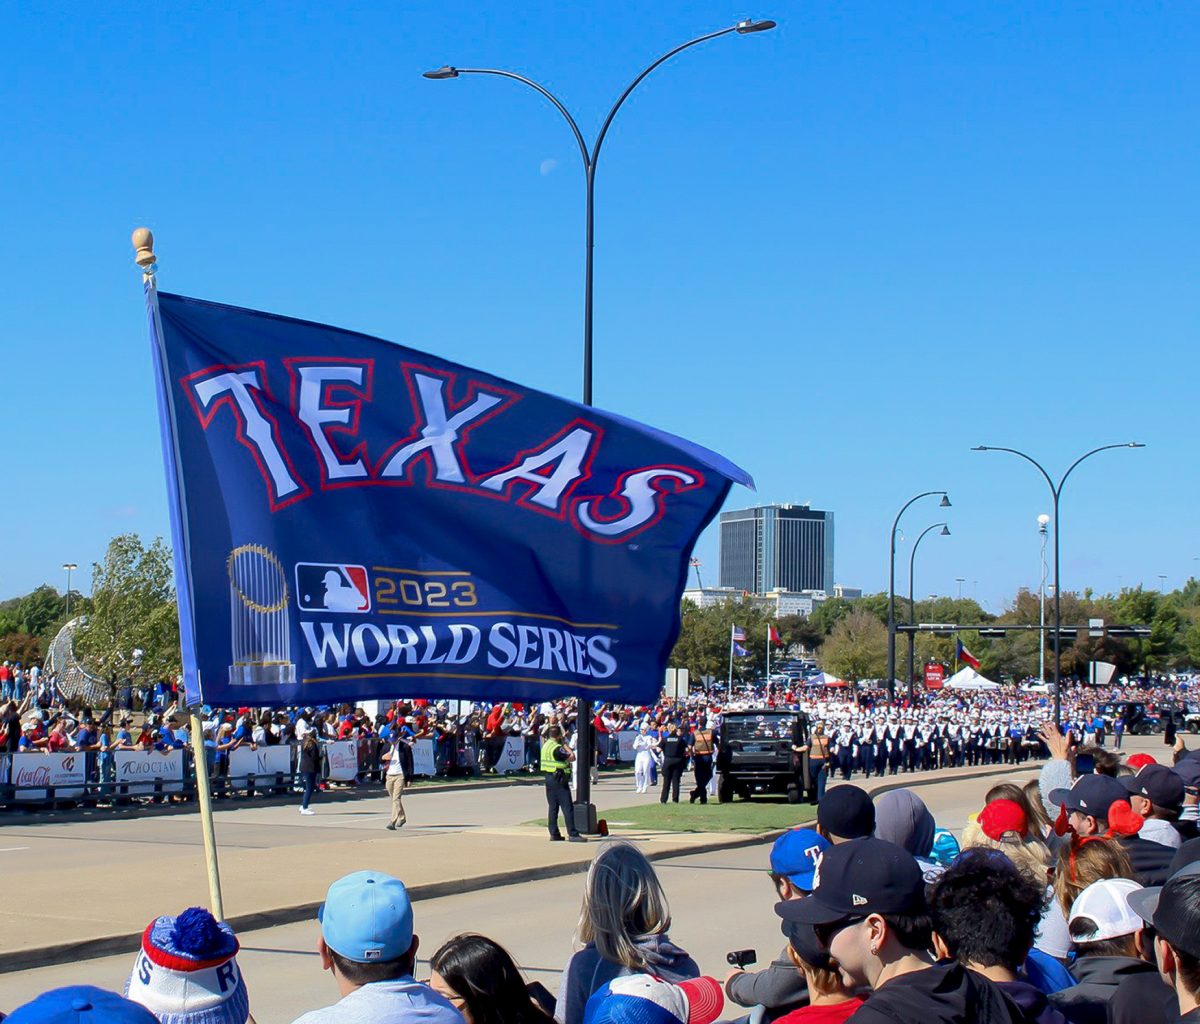 A Rangers flag is flown in celebration at their World Series victory parade in Arlington.